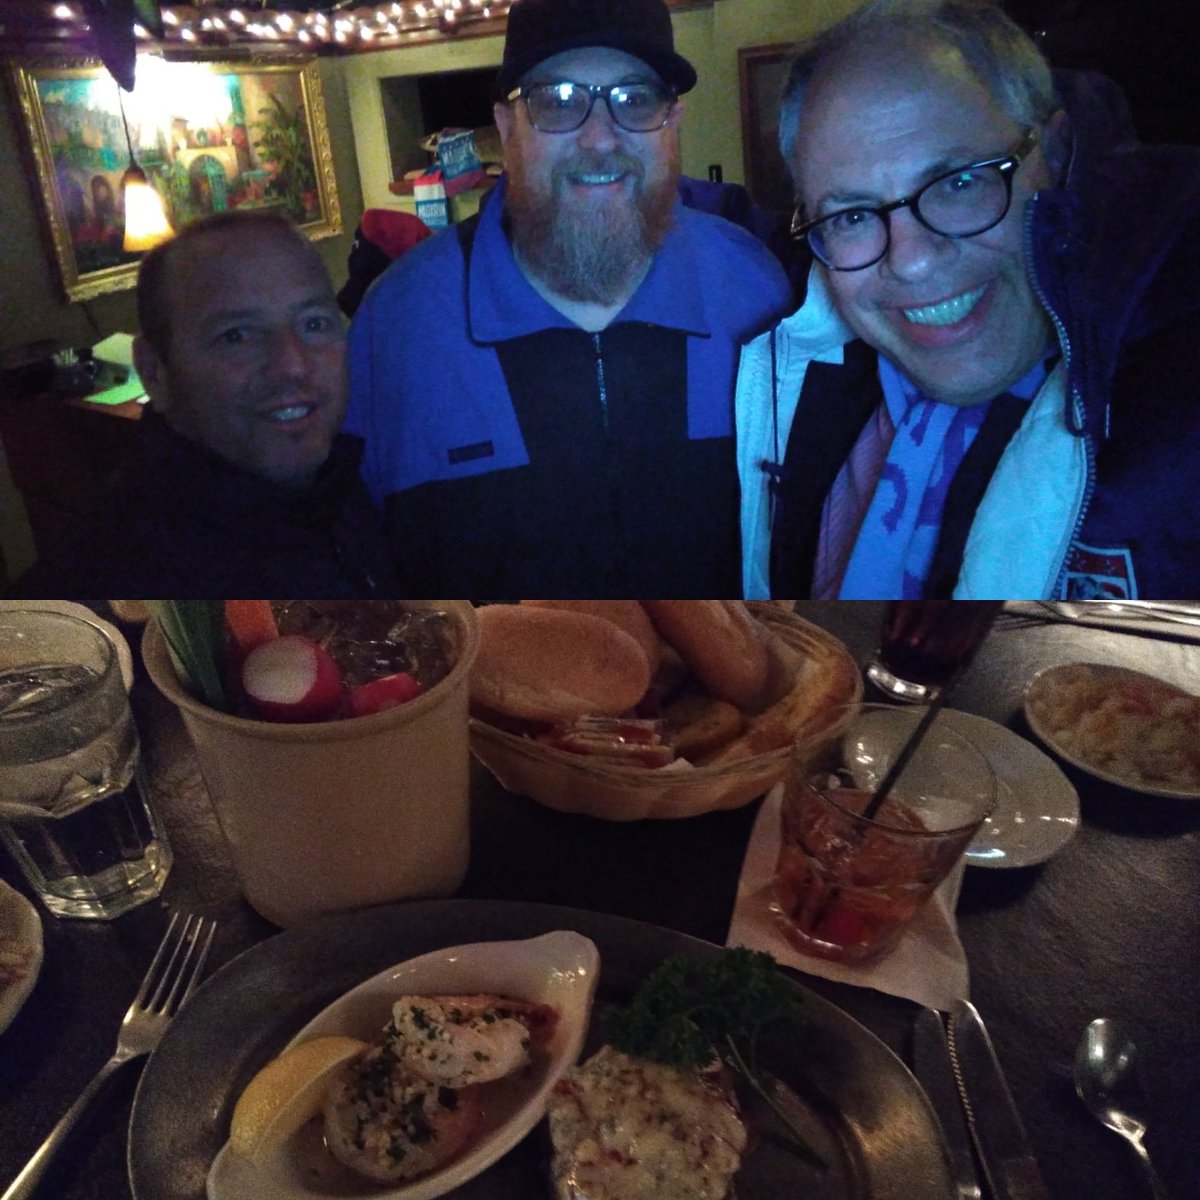 Sharing good times with @dunord and @forwardmadisonfc head Coach Daryl Shore at Smoky's Club. #filet #oldfashioneds #relishtray